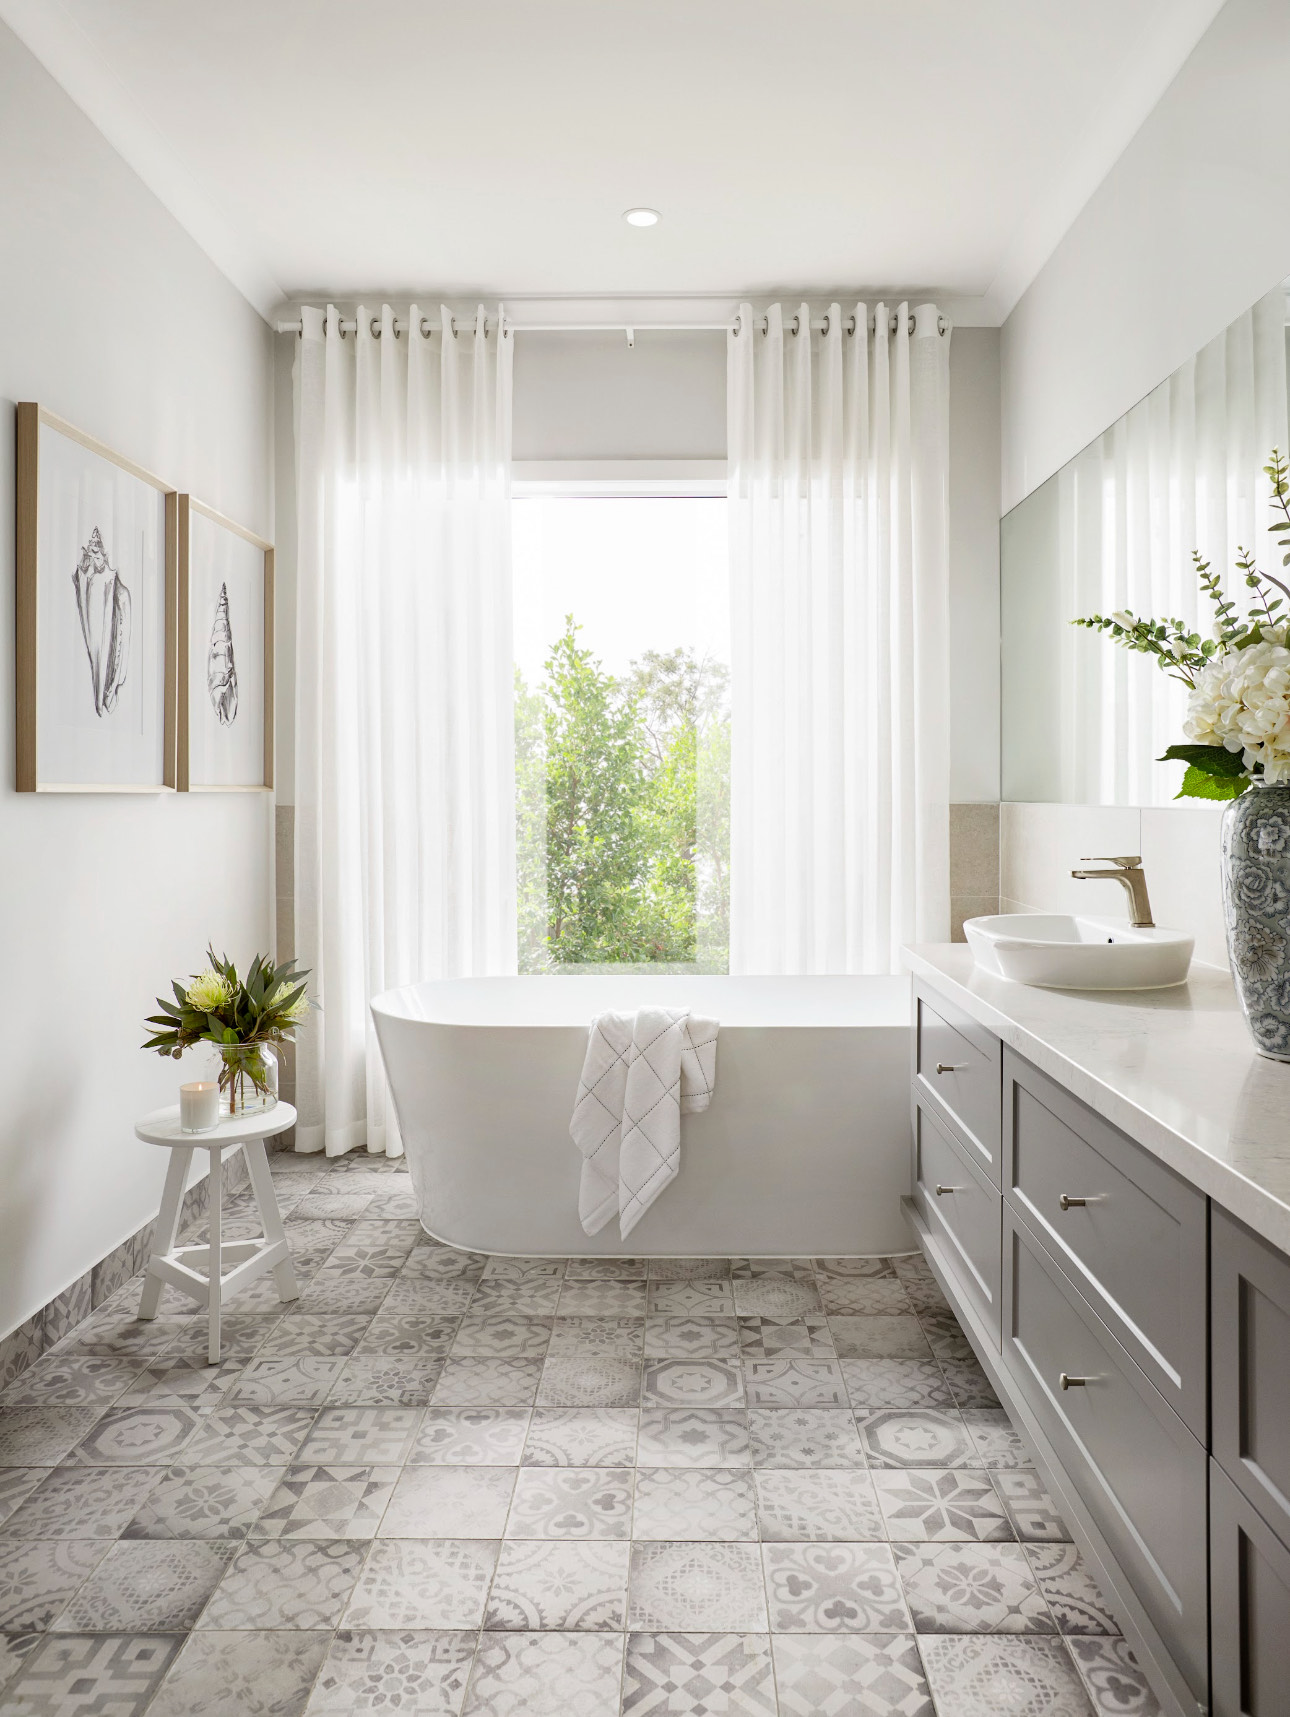 5 Eco-Friendly Bathroom Updates That Save Energy and Money